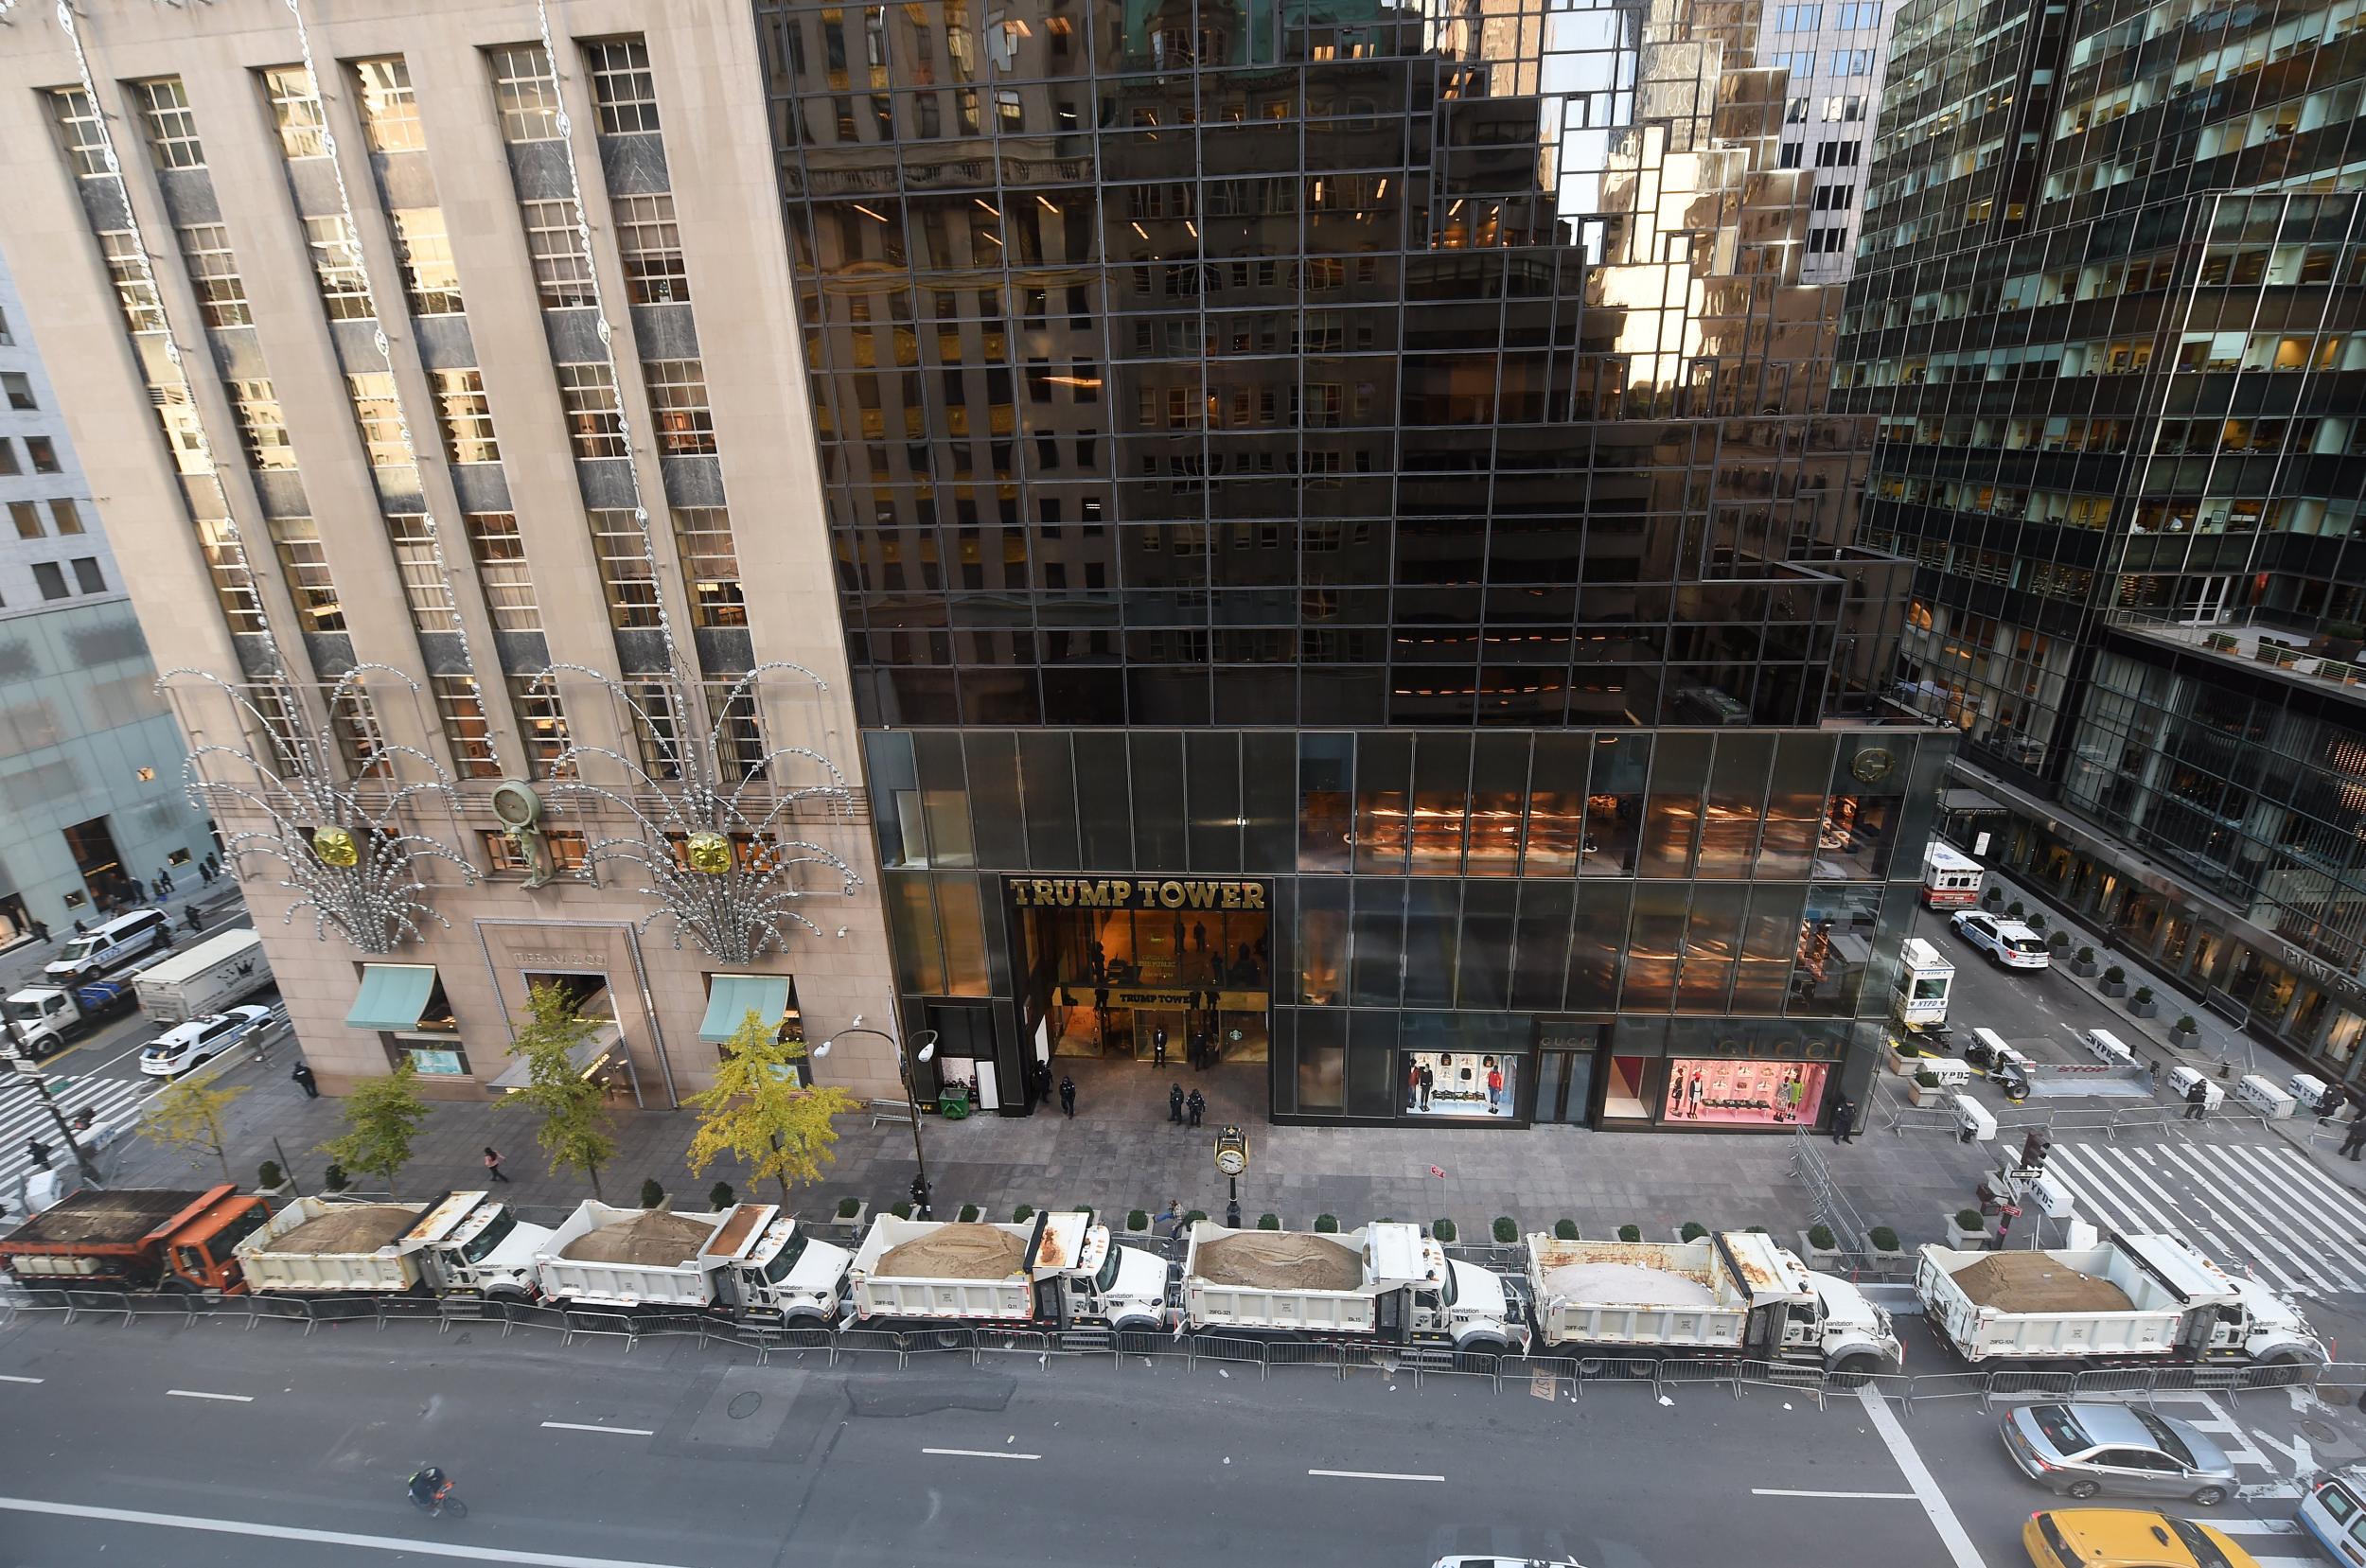 A protective barrier of Sanitation Department trucks are parked in front of Trump Tower